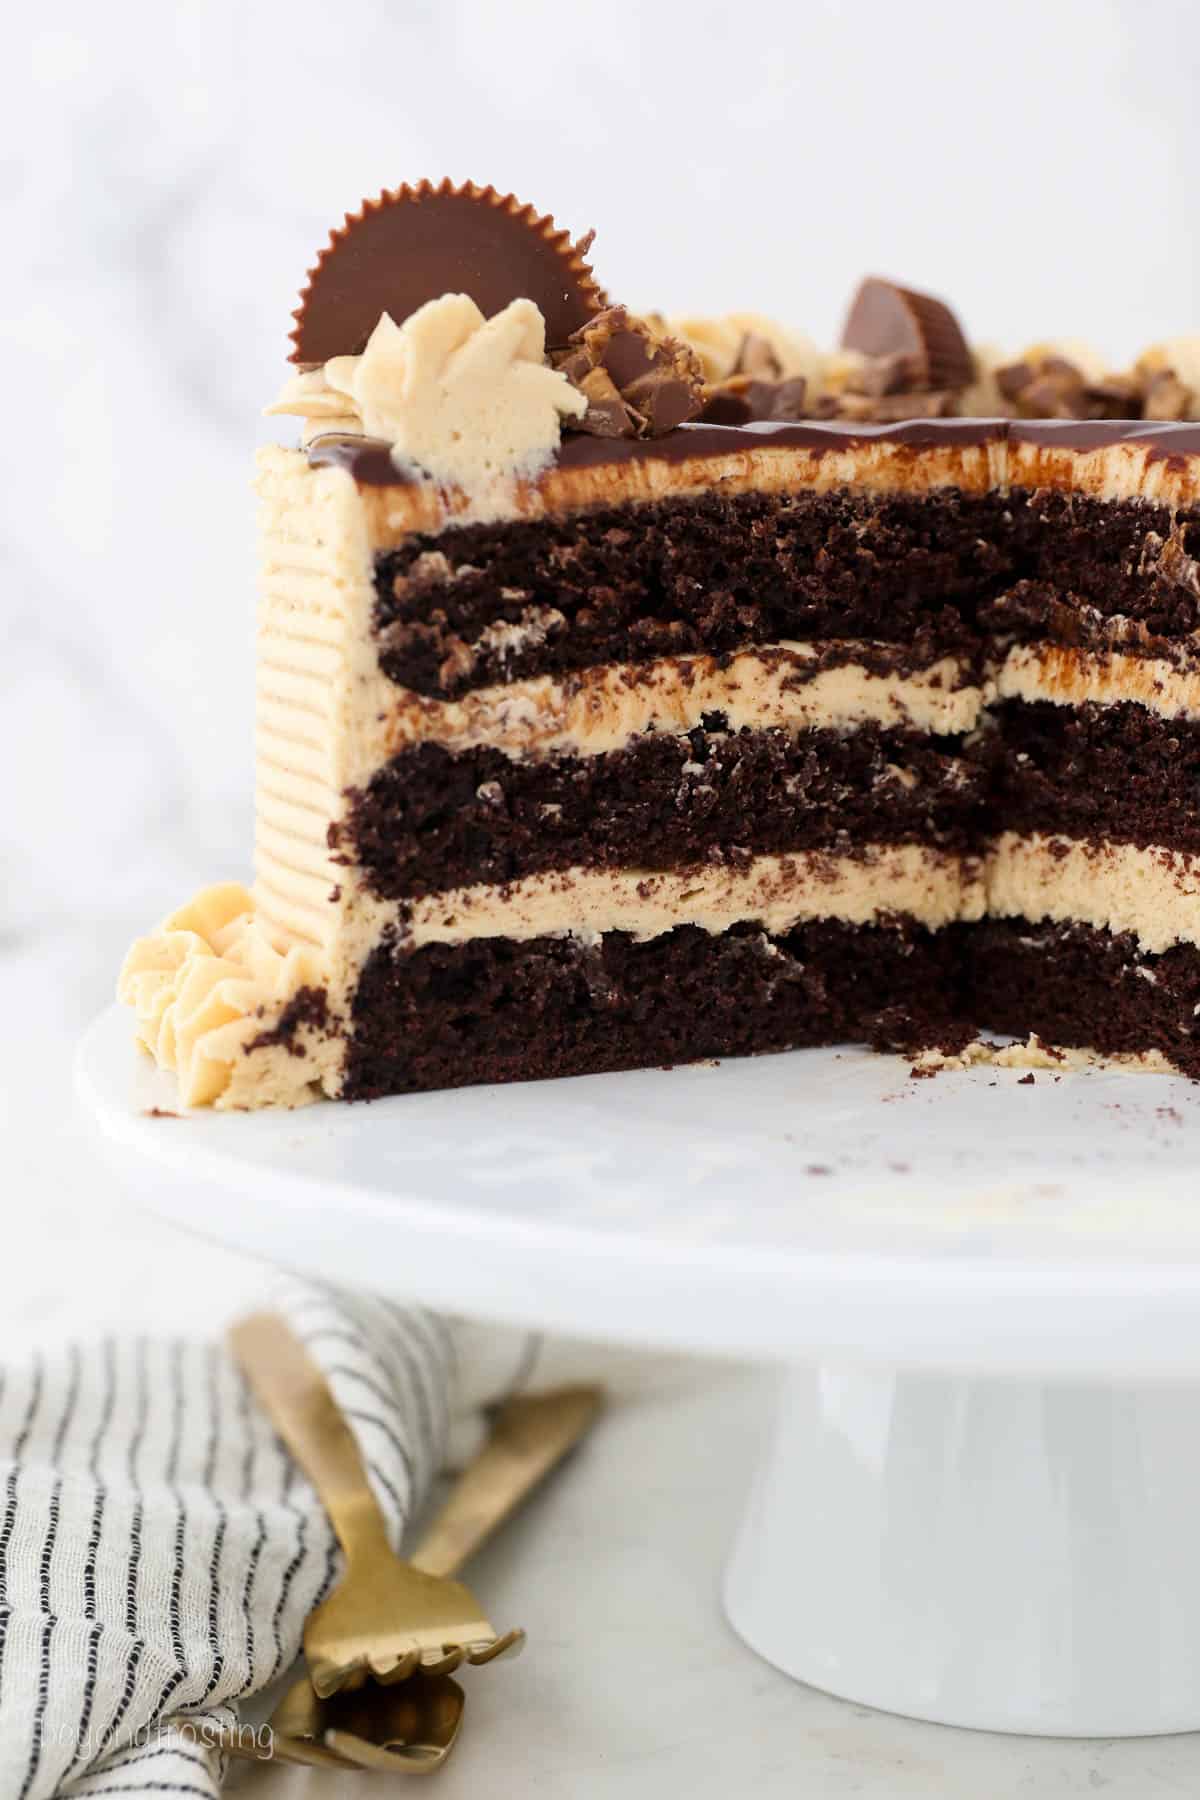 Half of a frosted chocolate peanut butter layer cake on a white cake stand.